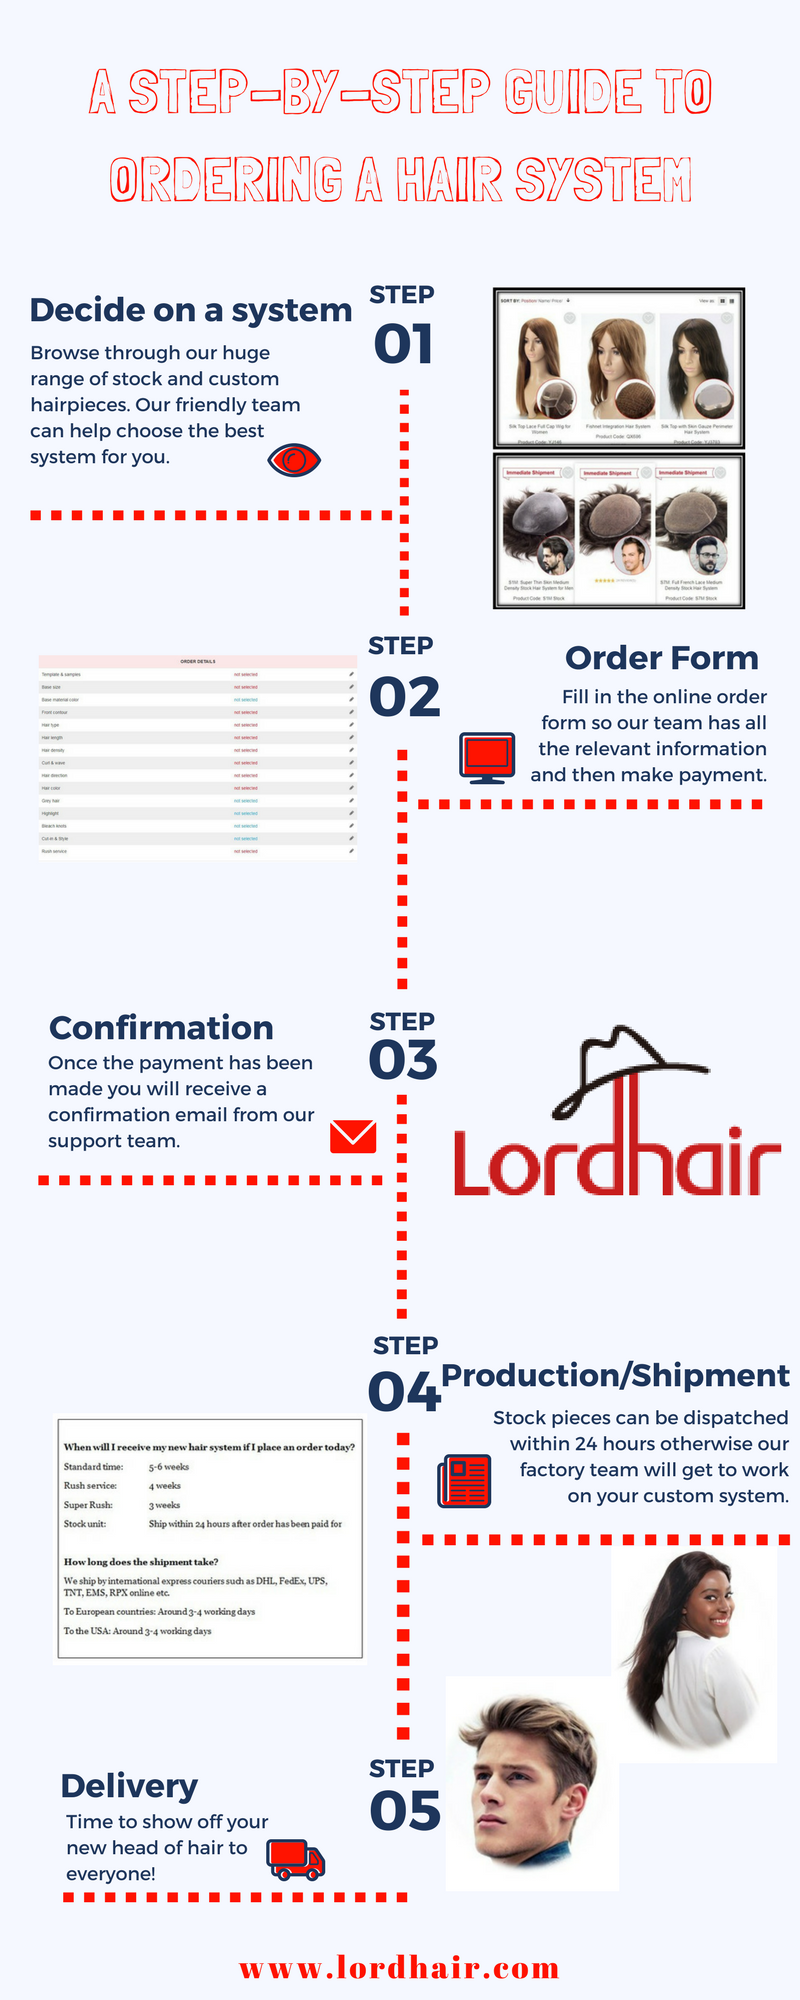 How to Order Hair System at Lordhair